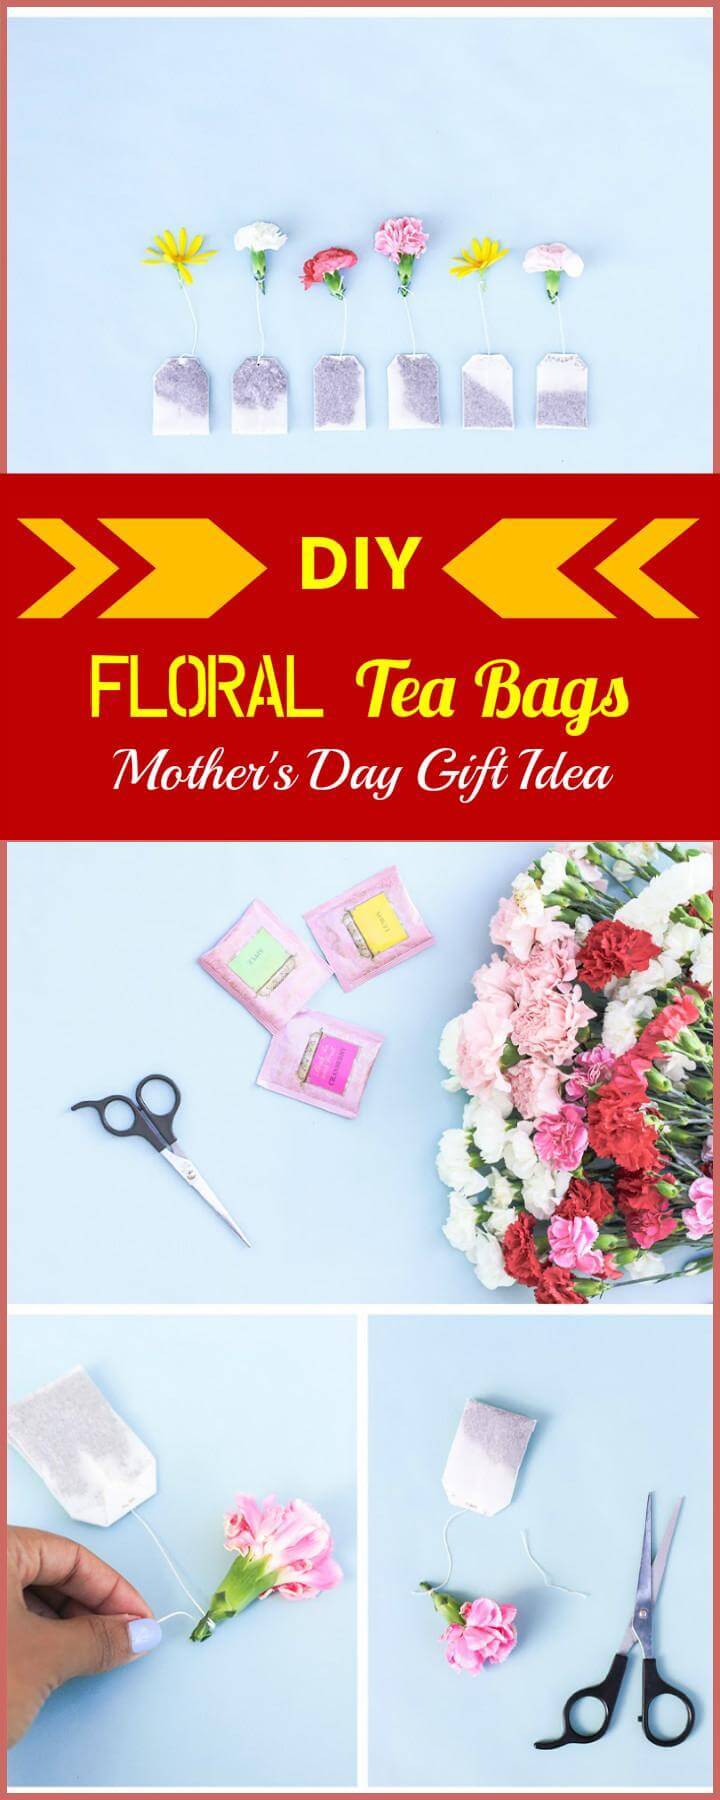 DIY floral tea bags mothers day gift idea